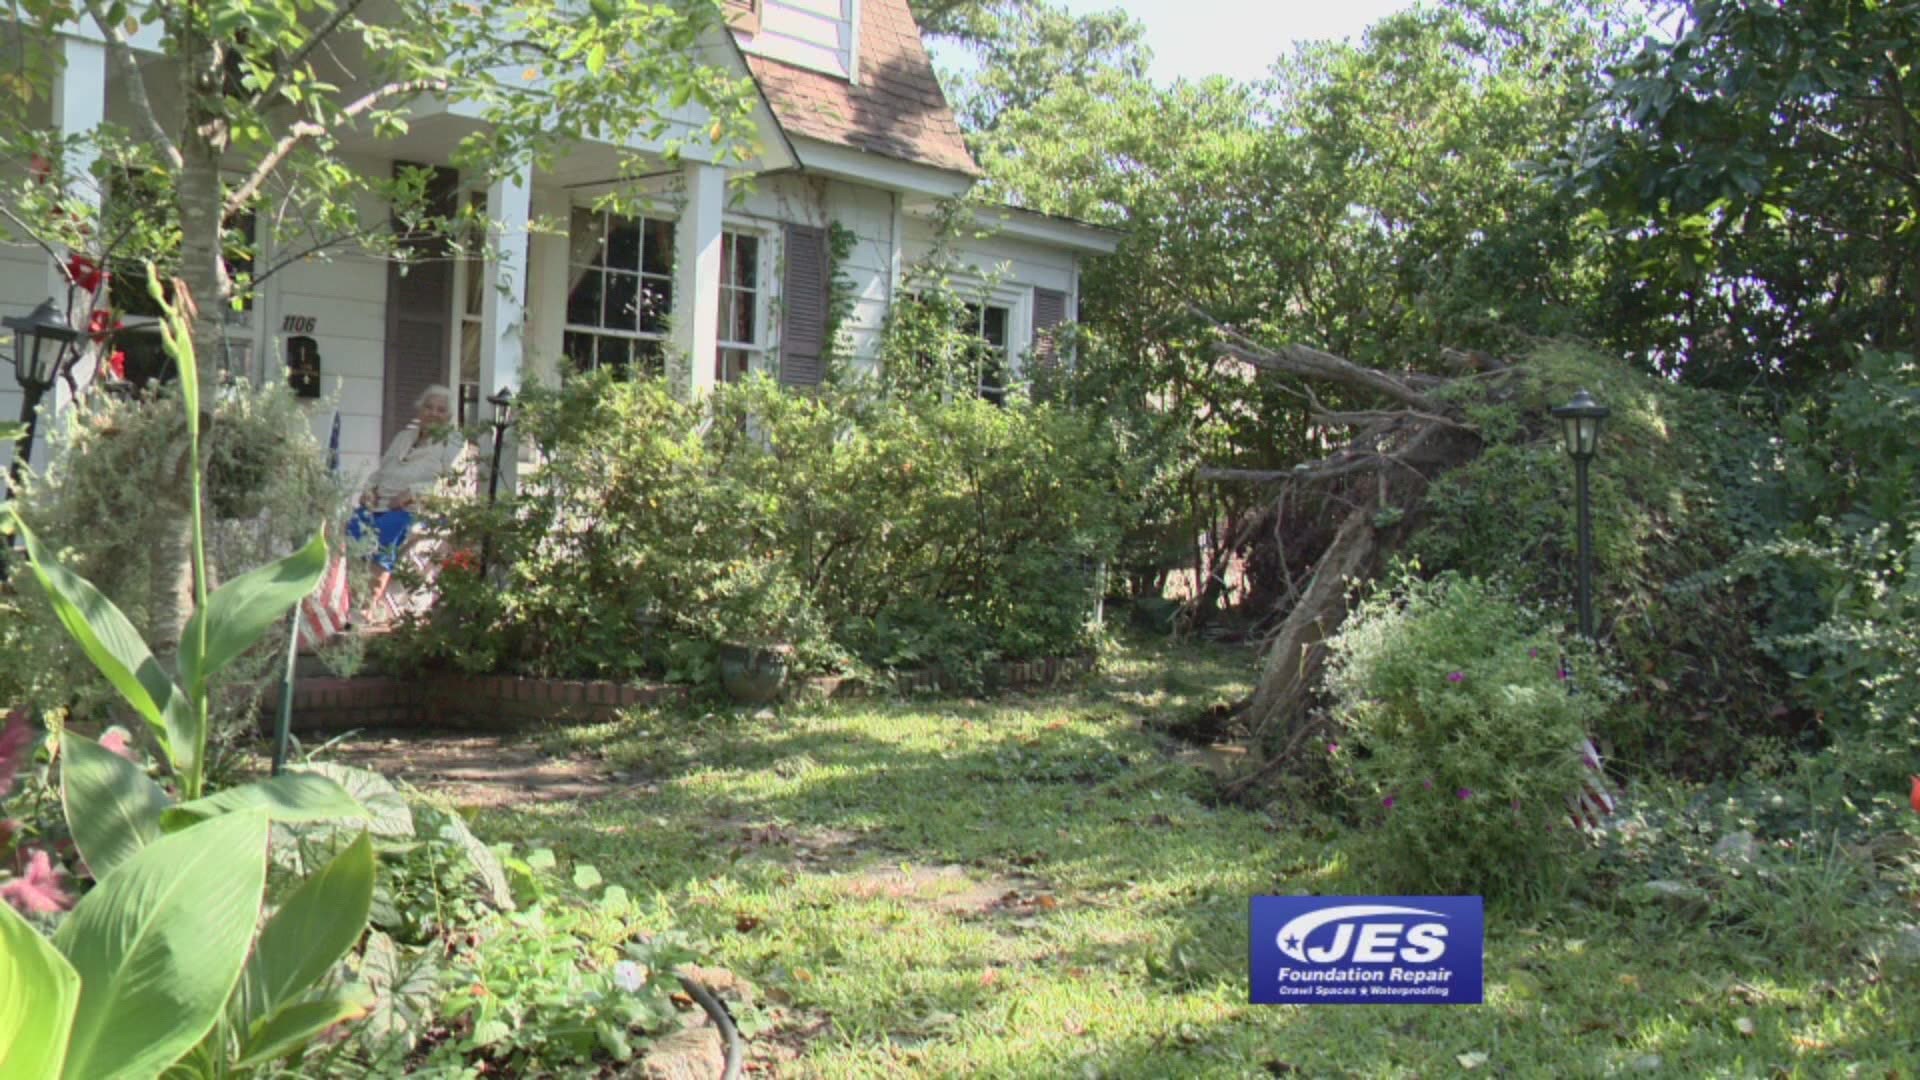 Ninety-five-year-old Thelma Horner sustained more damage after the 80-foot pine tree in her front yard toppled over. “It was tremendous a sound, so I knew the tree had fallen,” said Horner. “I was so thankful it fell towards the street and not towards the house.”